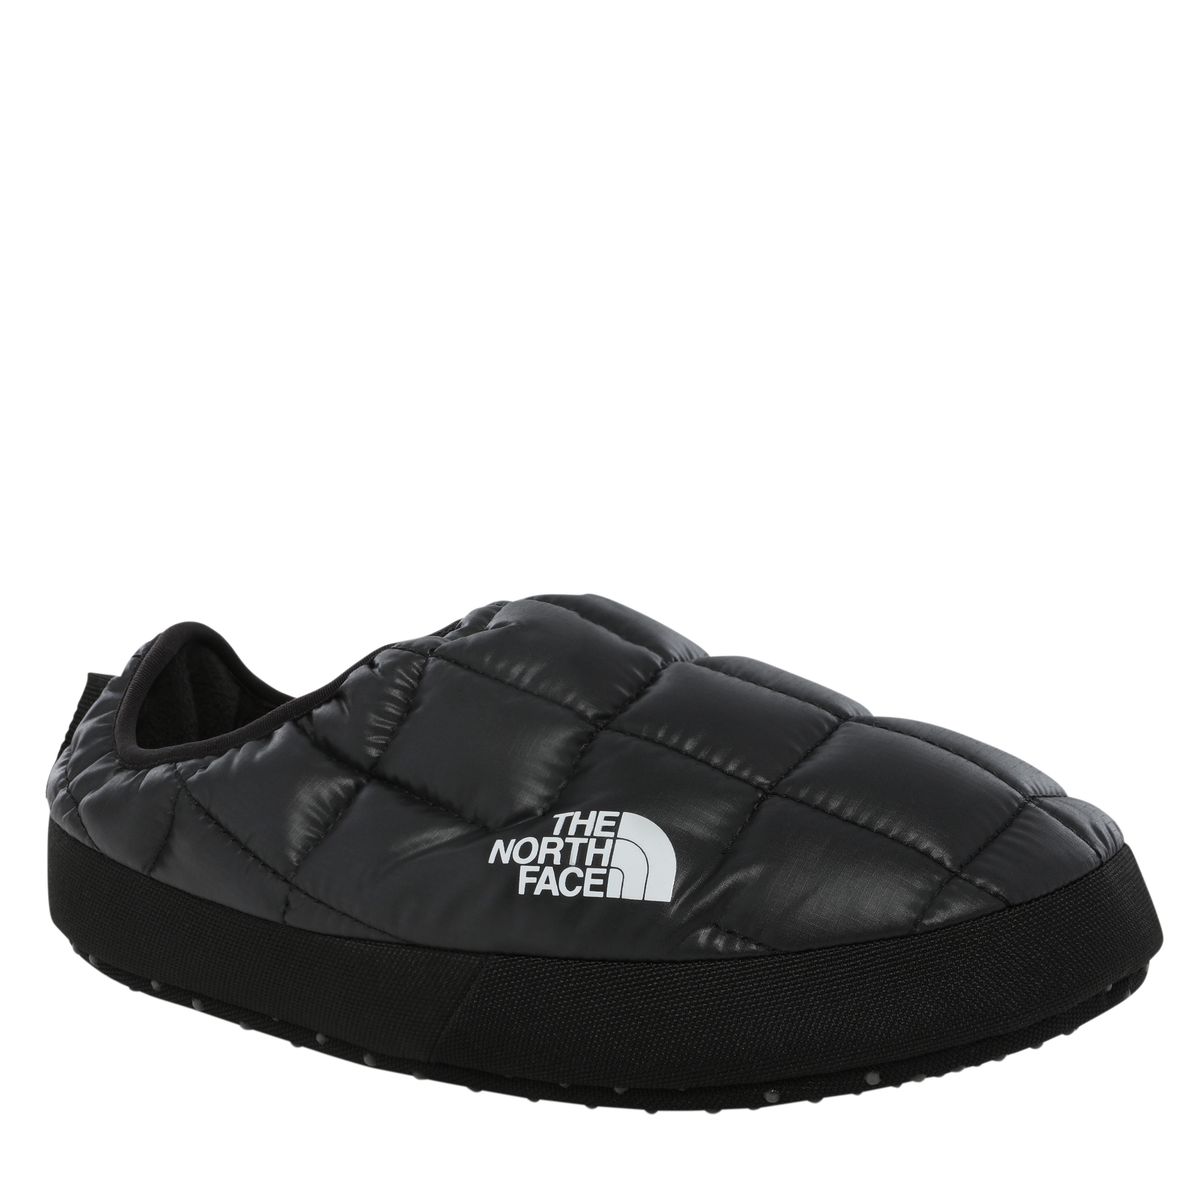 The North Face Women's Thermoball Tent Mule - Black | Shop Today. Get ...